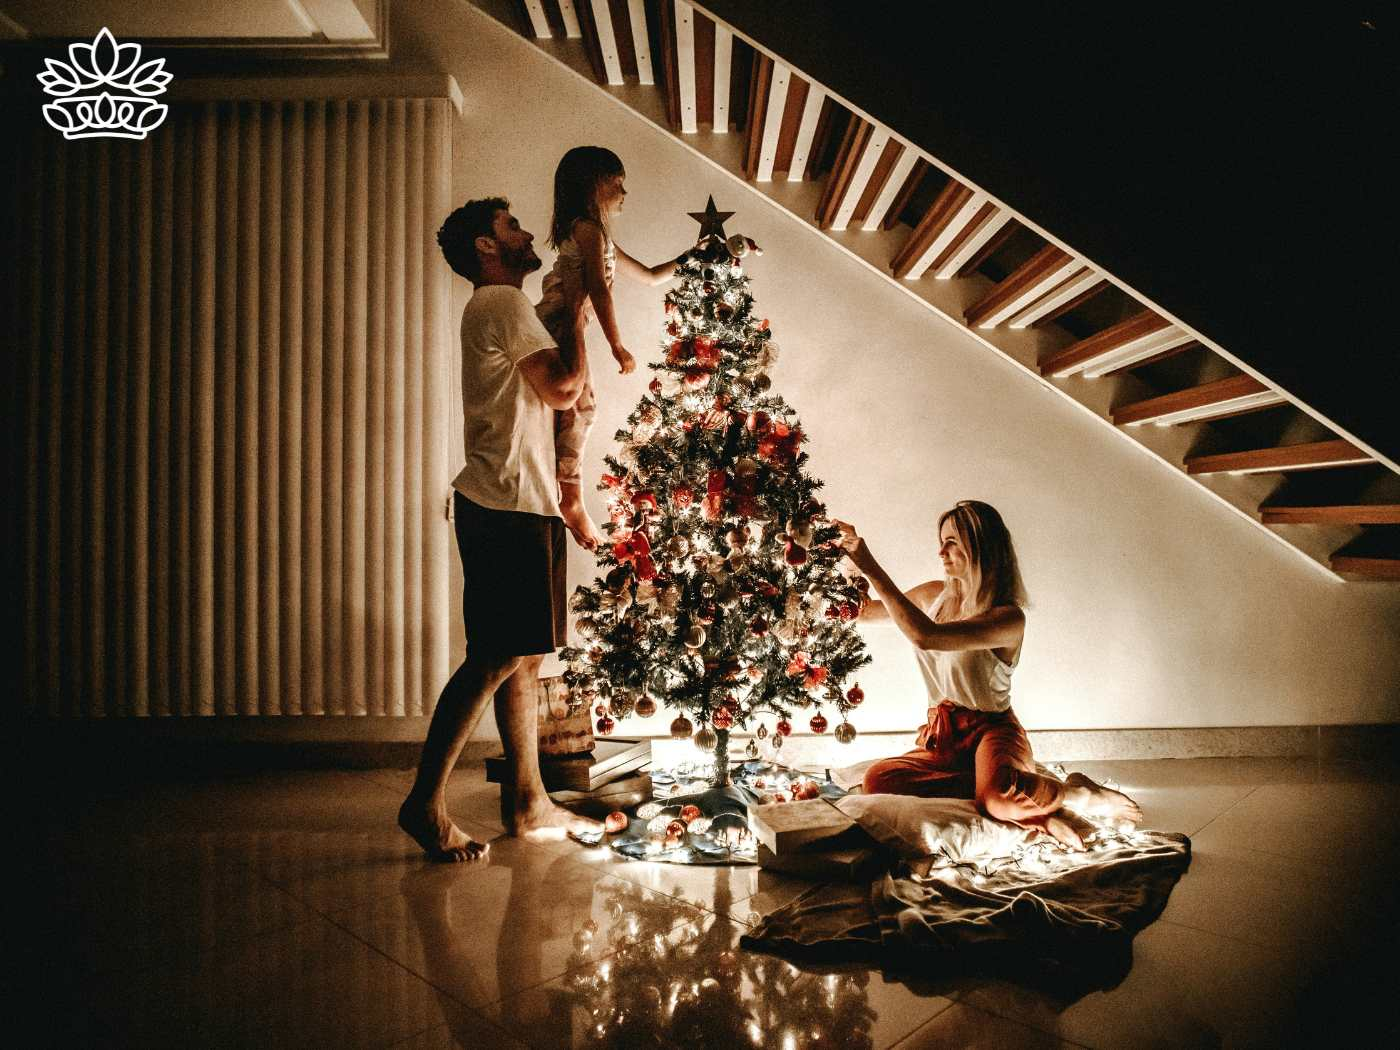 A family moment with a child being lifted to decorate a richly adorned Christmas tree, capturing the warm spirit of the season, available from Fabulous Flowers and Gifts.